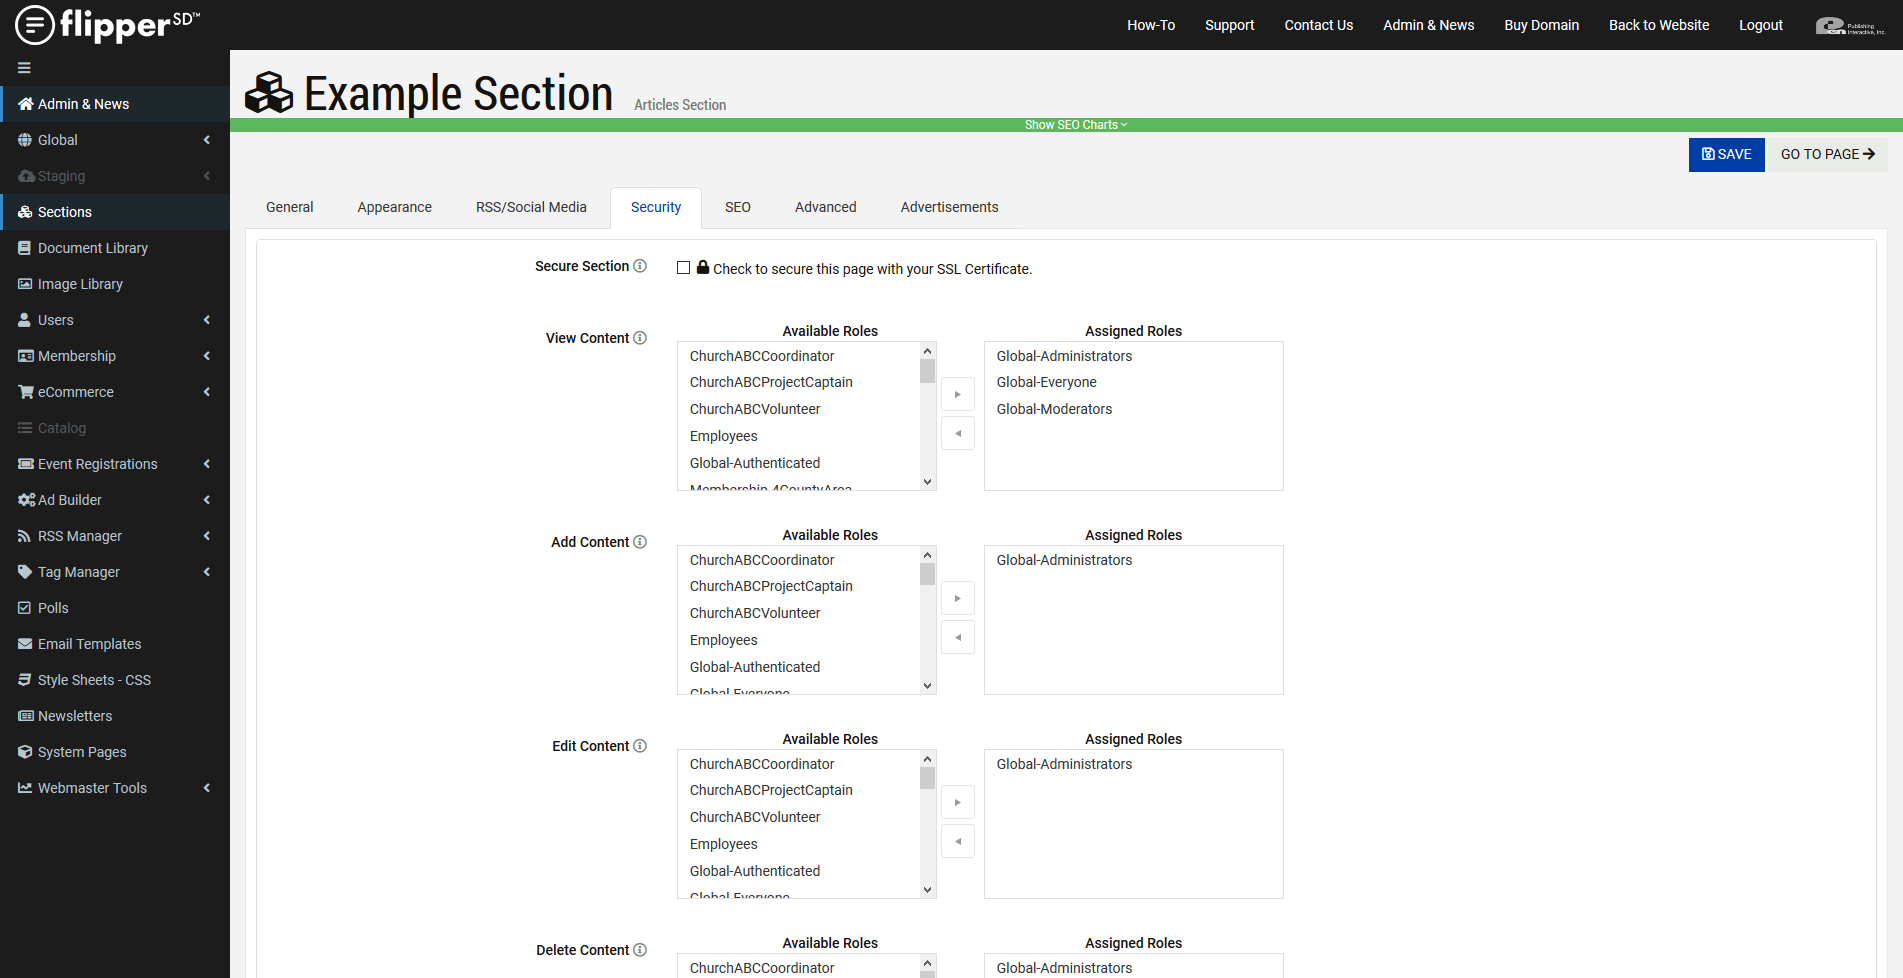 Articles Section-Role Based Permissions